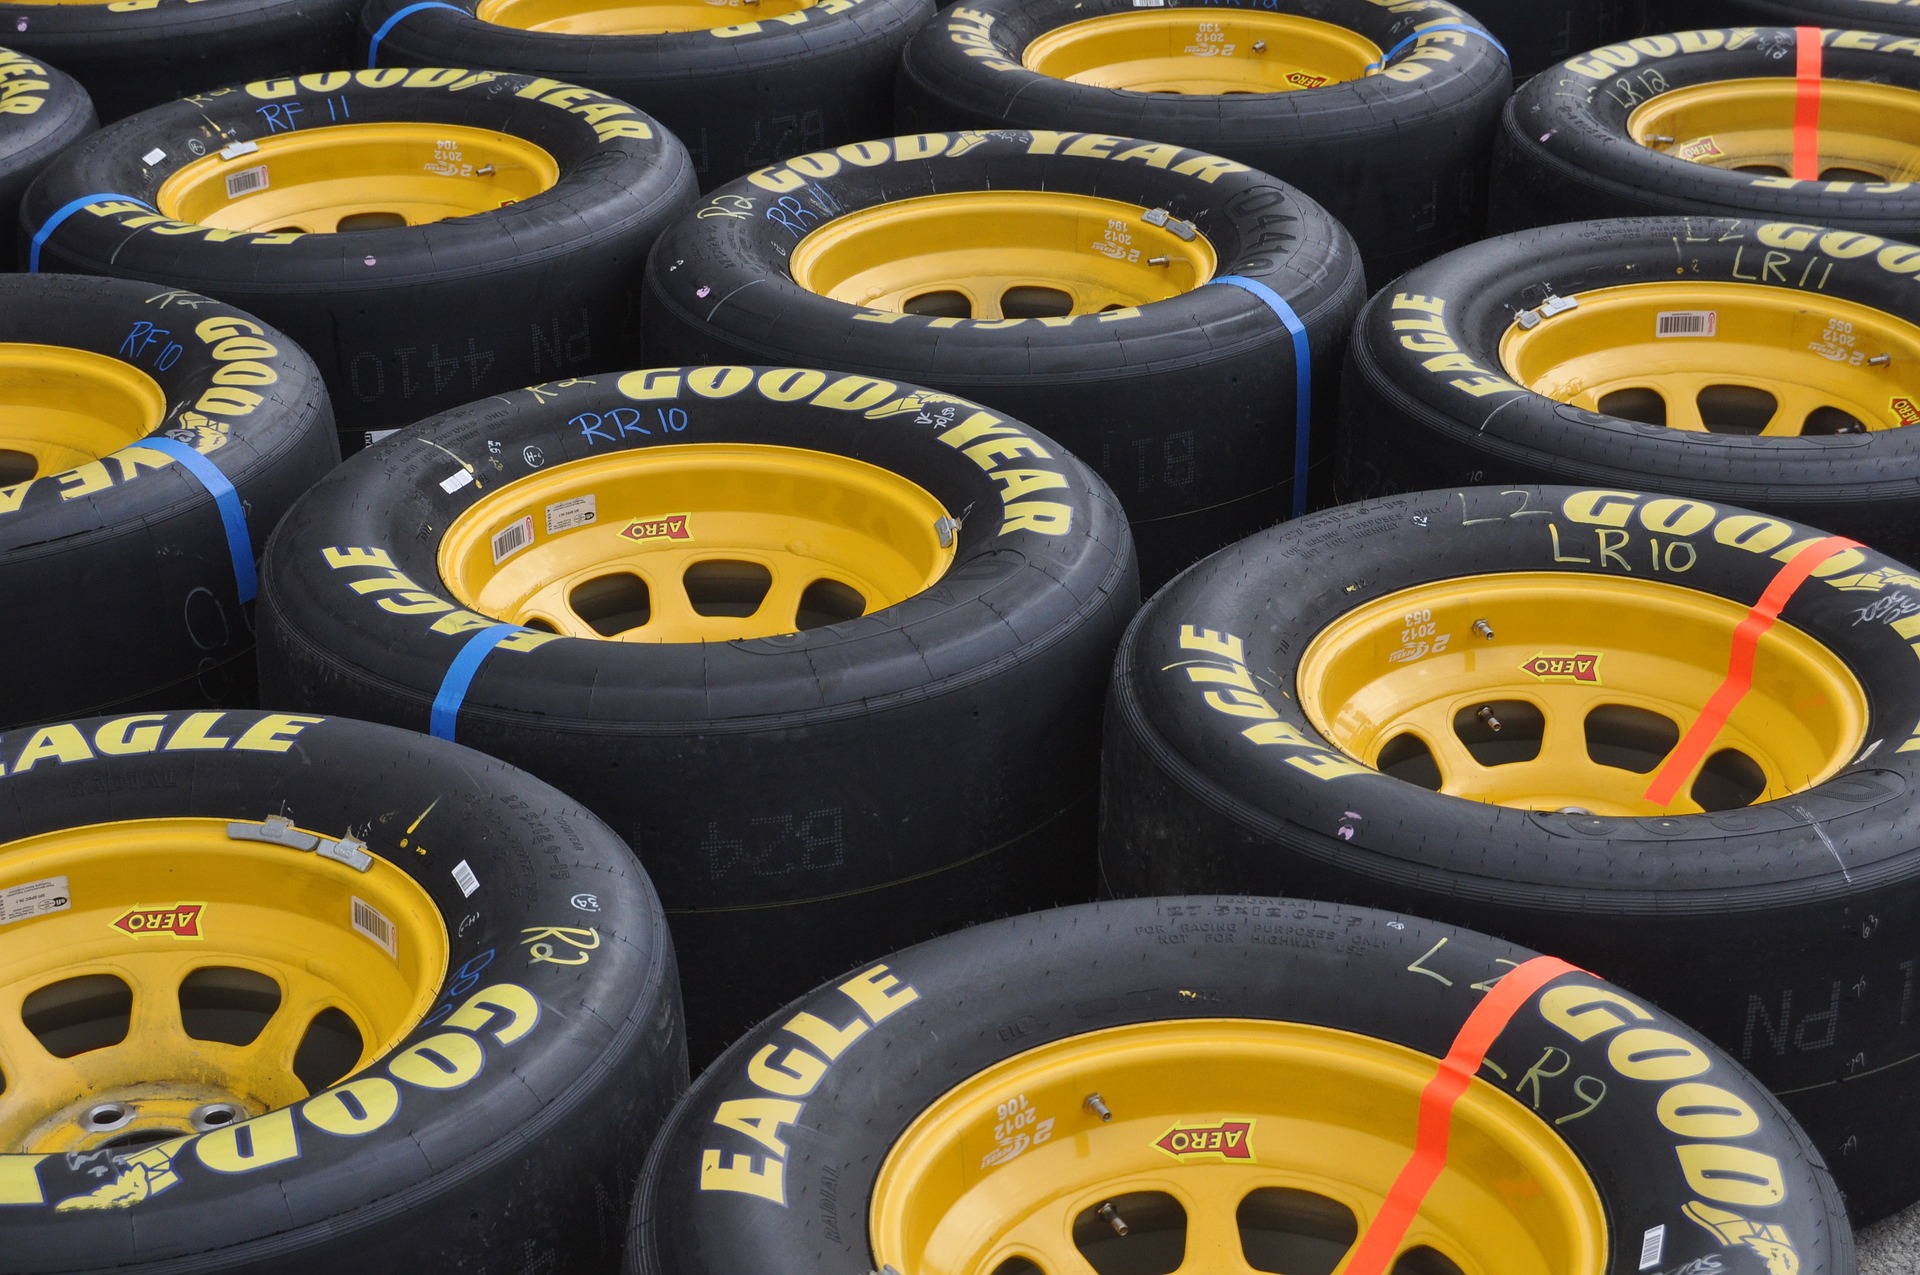 How much does a NASCAR race tire weigh?